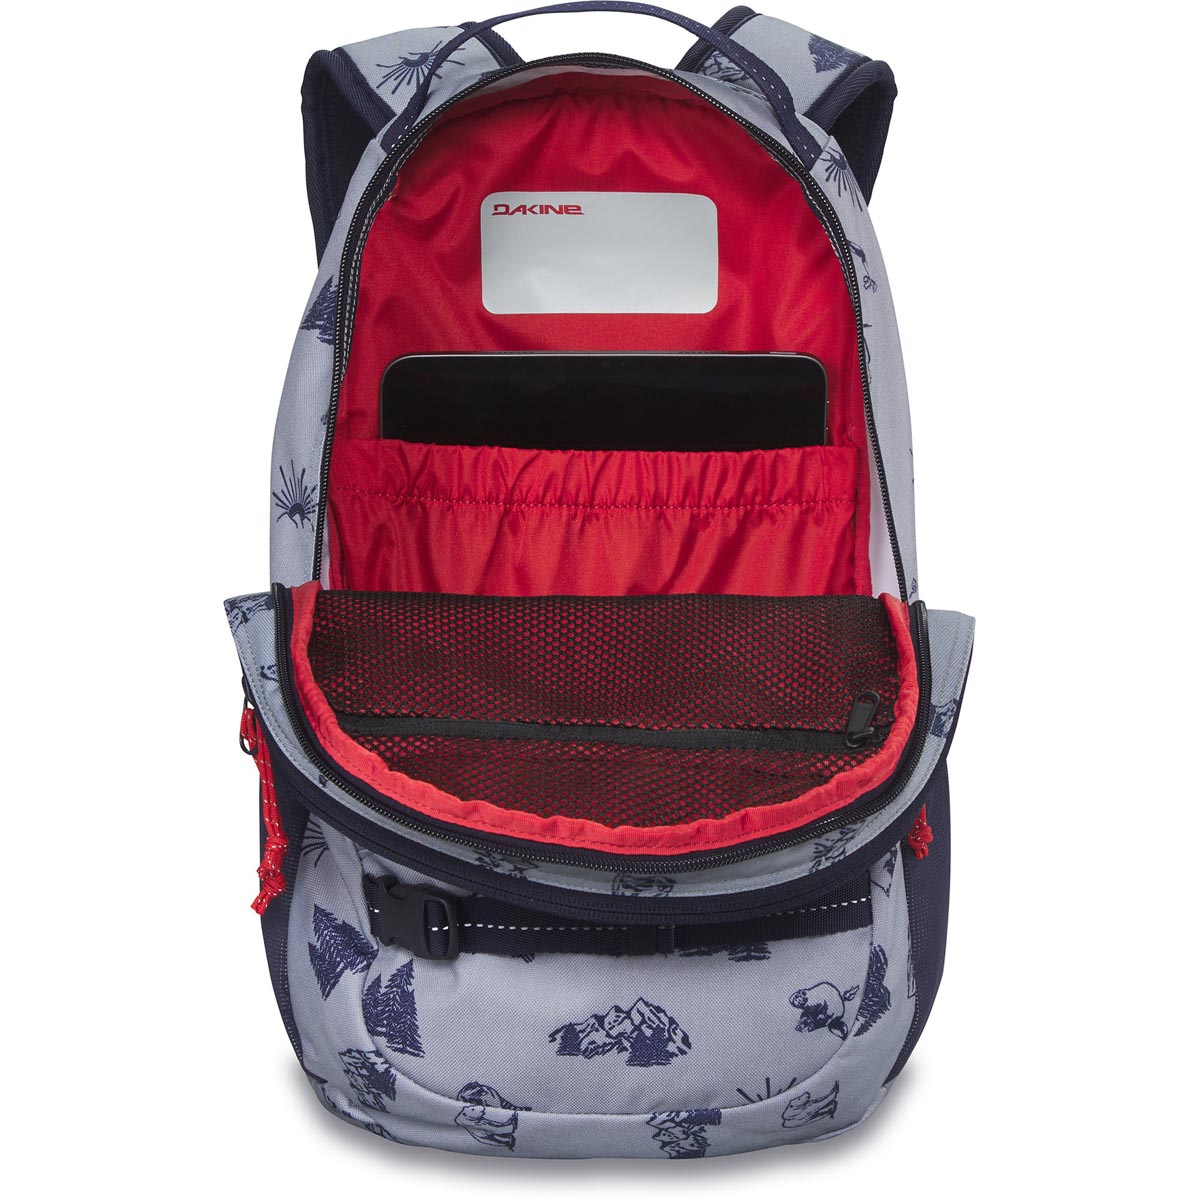 Dakine Youth Mission 18l Backpack - Jungle Punch image 3